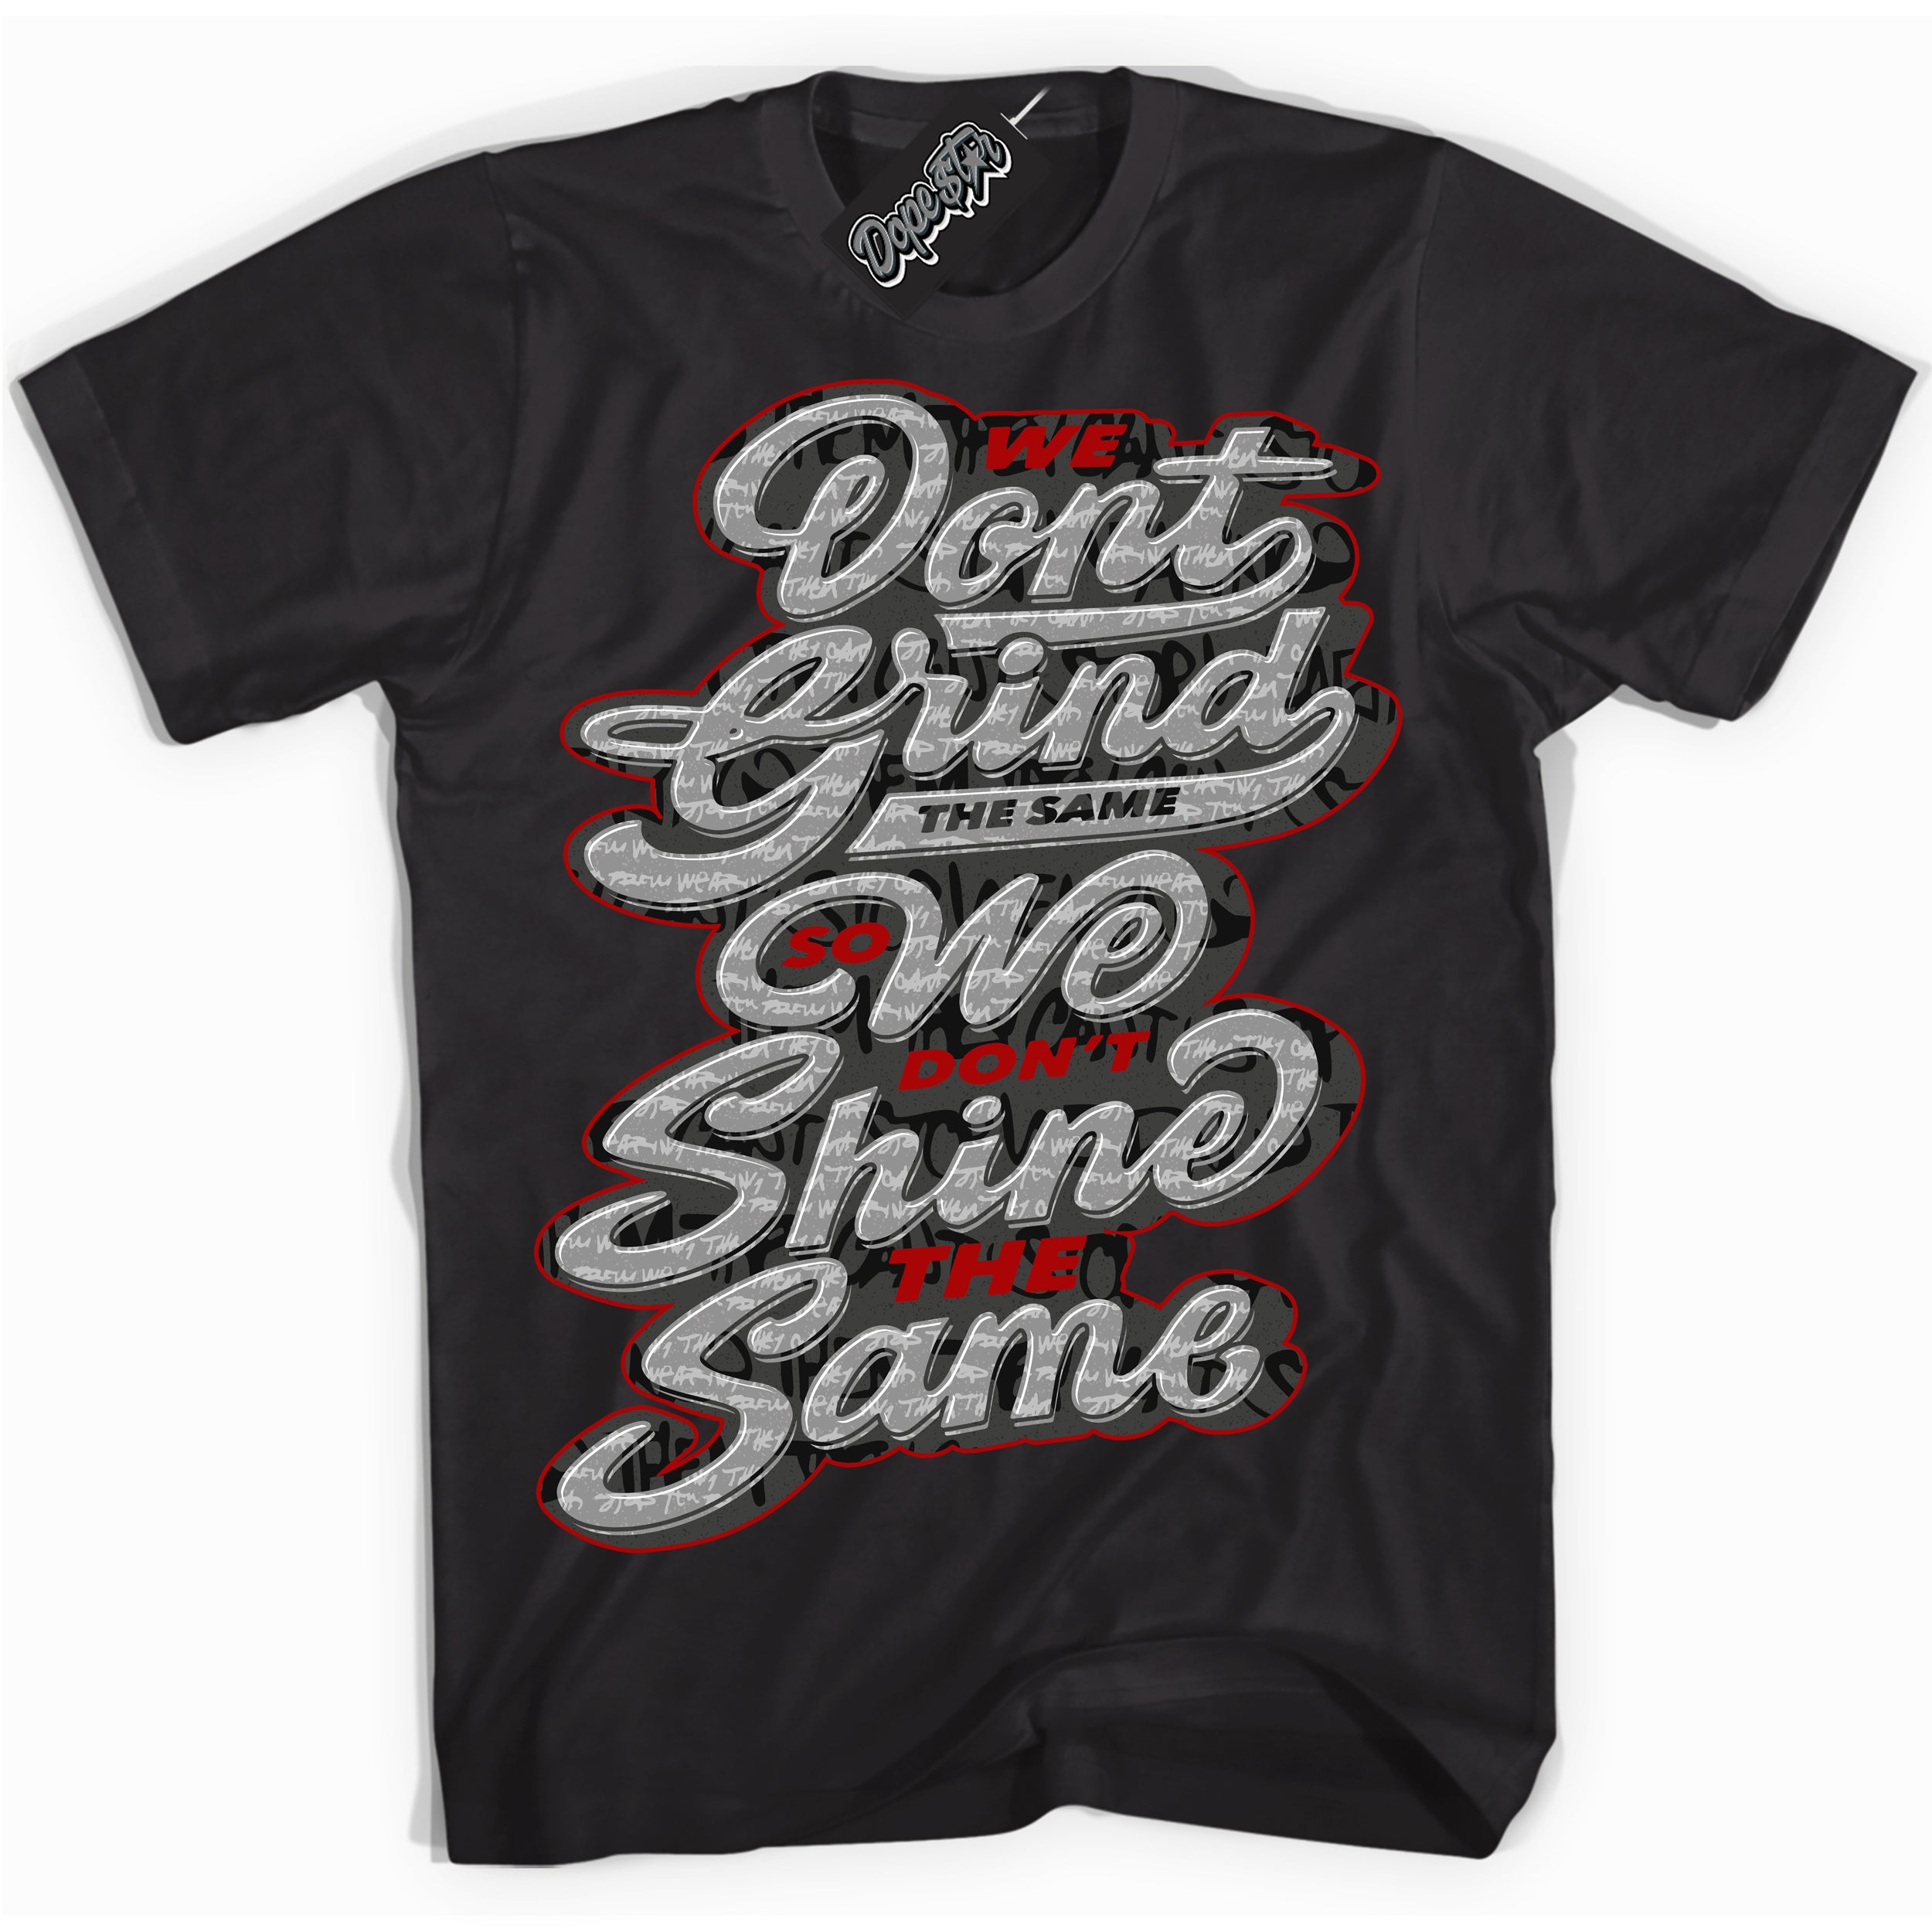 Cool Black Shirt with “ Grind Shine ” design that perfectly matches Rebellionaire 1s Sneakers.